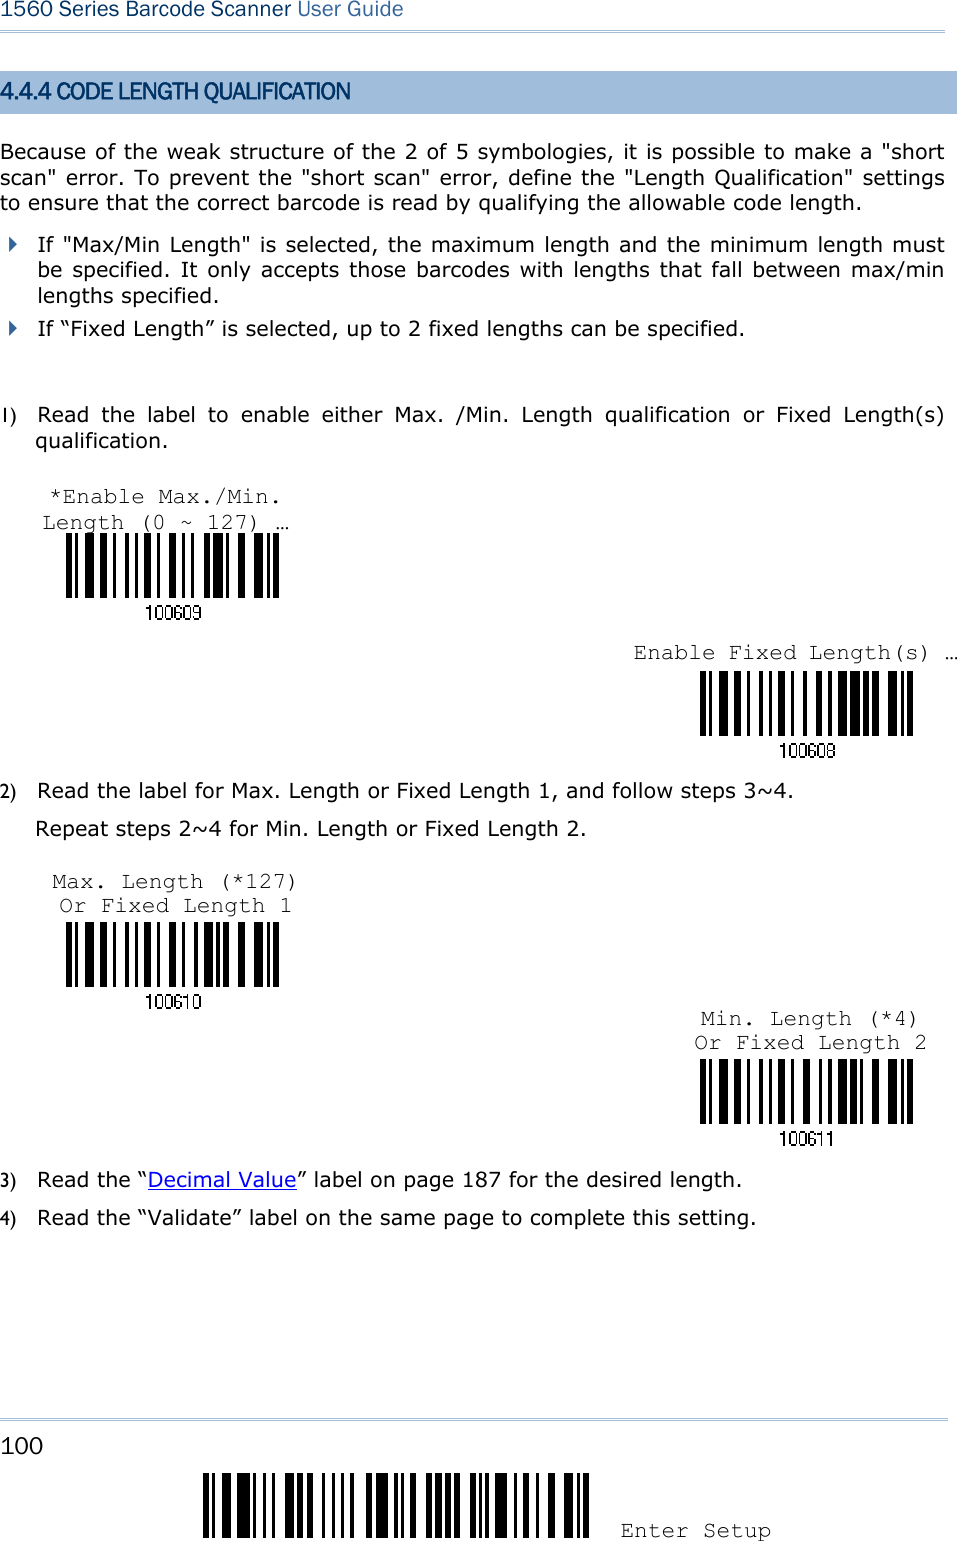 100 Enter Setup 1560 Series Barcode Scanner User Guide  4.4.4 CODE LENGTH QUALIFICATION Because of the weak structure of the 2 of 5 symbologies, it is possible to make a &quot;short scan&quot; error. To prevent the &quot;short scan&quot; error, define the &quot;Length Qualification&quot; settings to ensure that the correct barcode is read by qualifying the allowable code length.  If &quot;Max/Min Length&quot; is selected, the maximum length and the minimum length must be specified. It only accepts those barcodes with lengths that fall between max/min lengths specified.  If “Fixed Length” is selected, up to 2 fixed lengths can be specified.  1) Read the label to enable either Max. /Min. Length qualification or Fixed Length(s) qualification.    2) Read the label for Max. Length or Fixed Length 1, and follow steps 3~4. Repeat steps 2~4 for Min. Length or Fixed Length 2.    3) Read the “Decimal Value” label on page 187 for the desired length.   4) Read the “Validate” label on the same page to complete this setting.    Enable Fixed Length(s) …*Enable Max./Min. Length (0 ~ 127) … Min. Length (*4) Or Fixed Length 2 Max. Length (*127) Or Fixed Length 1 